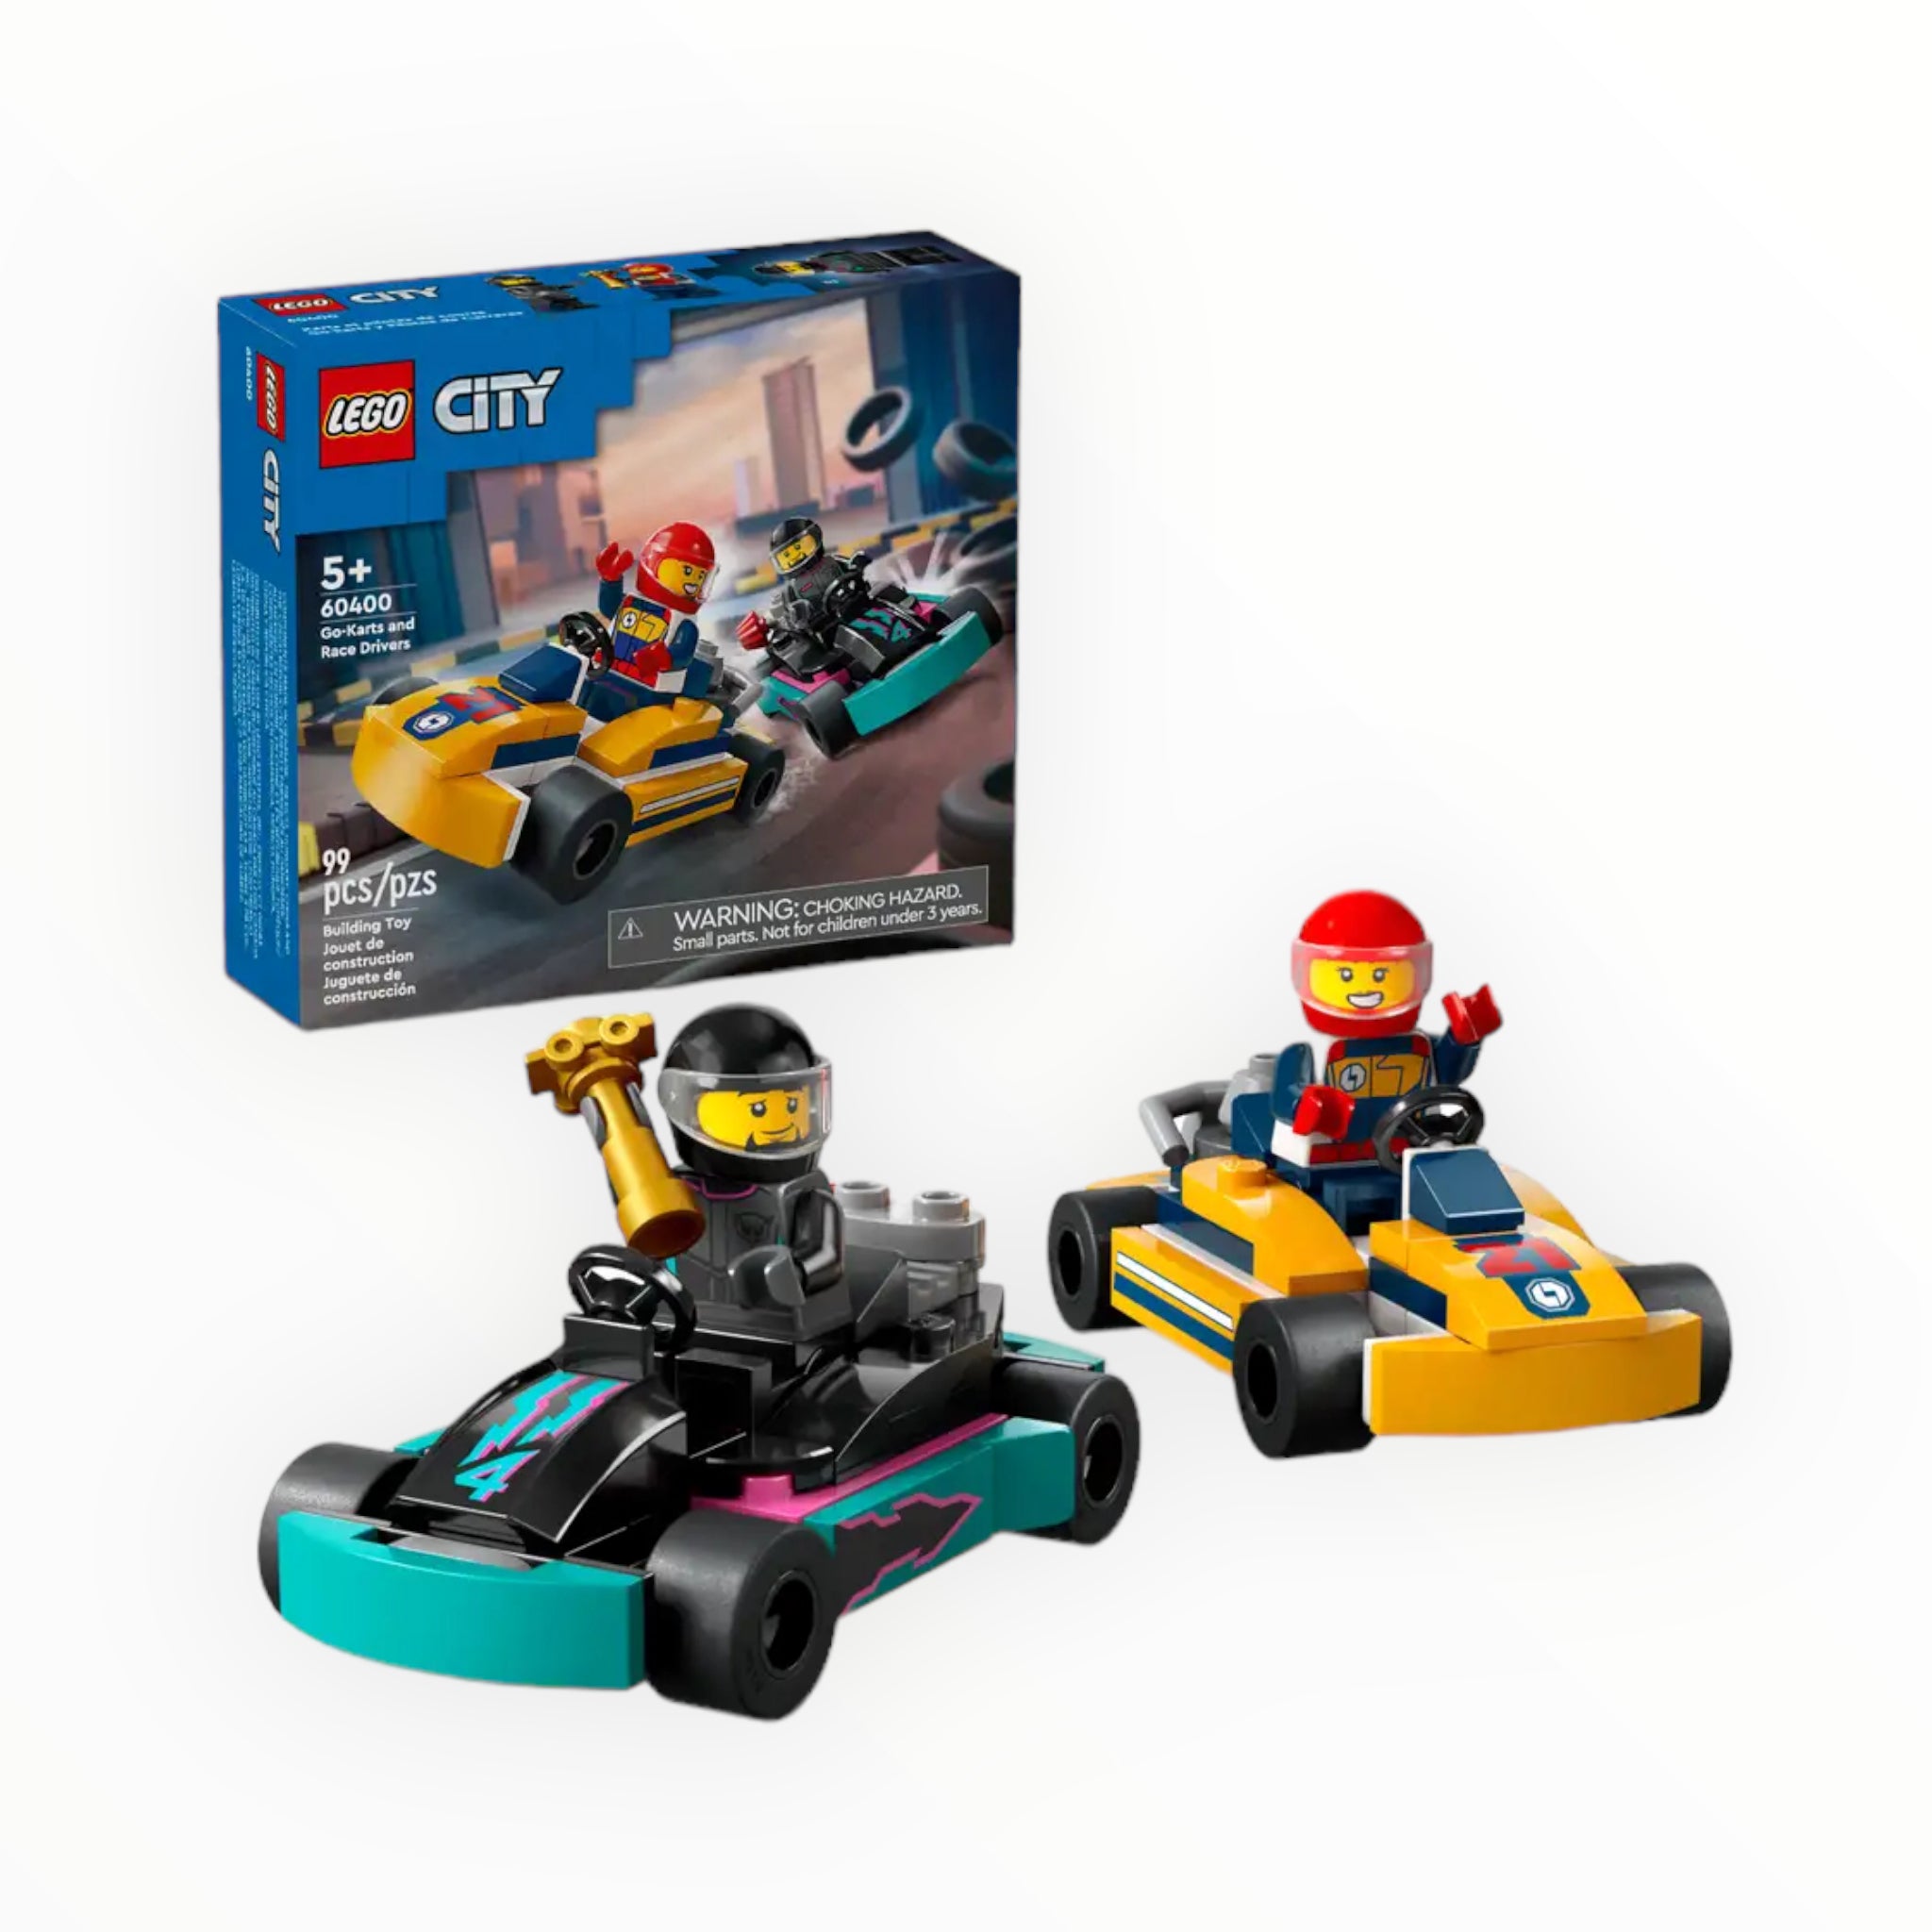 60400 City Go-Karts and Race Drivers